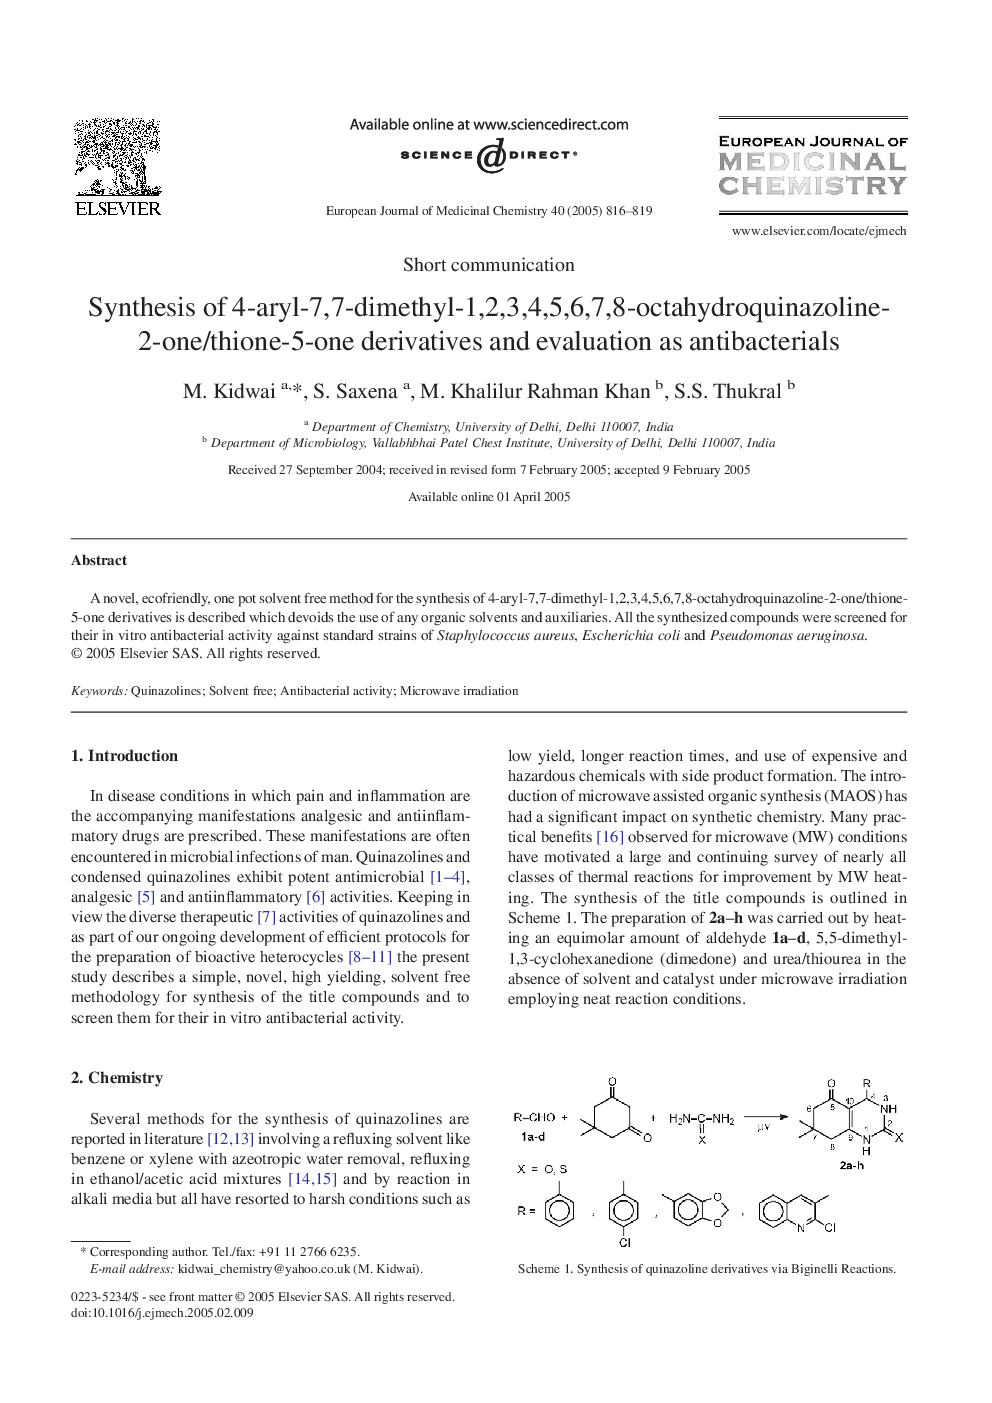 Synthesis of 4-aryl-7,7-dimethyl-1,2,3,4,5,6,7,8-octahydroquinazoline-2-one/thione-5-one derivatives and evaluation as antibacterials